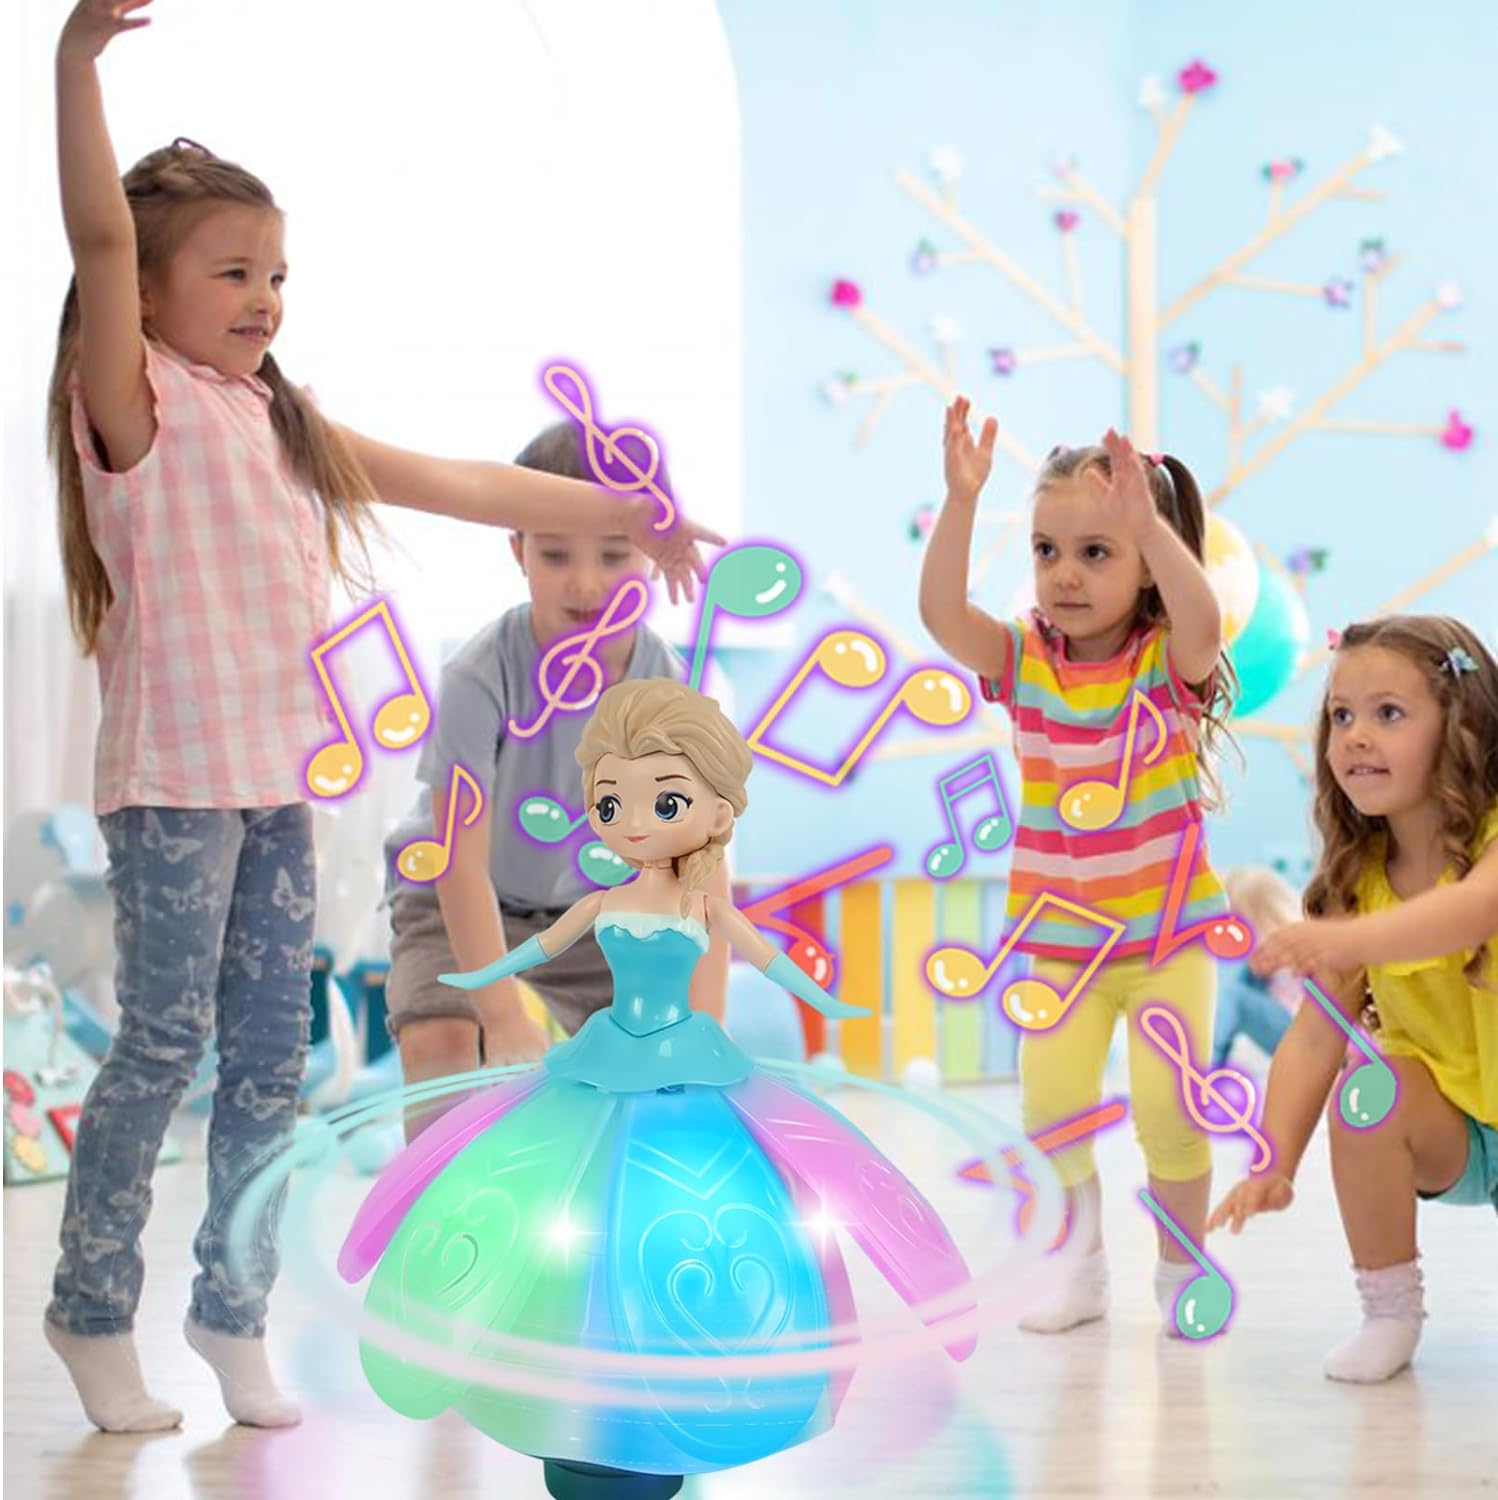 Enchanting Rotating Ice Princess Dancing Robot Toy with Colorful Lights, Music & Interactive Features